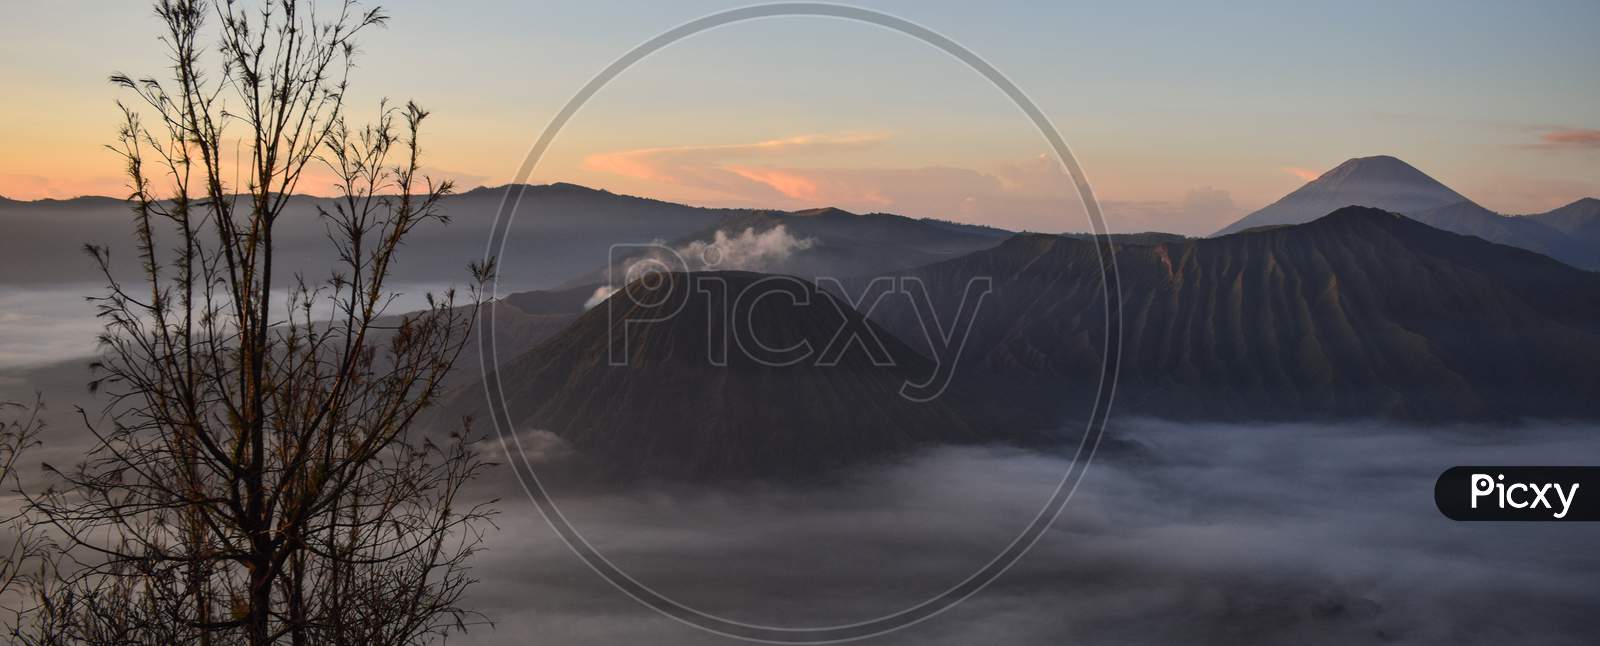 Mount Bromo is naturally misty and dusty which is very beautiful with an old tree as the foreground,Nature bromo volcano